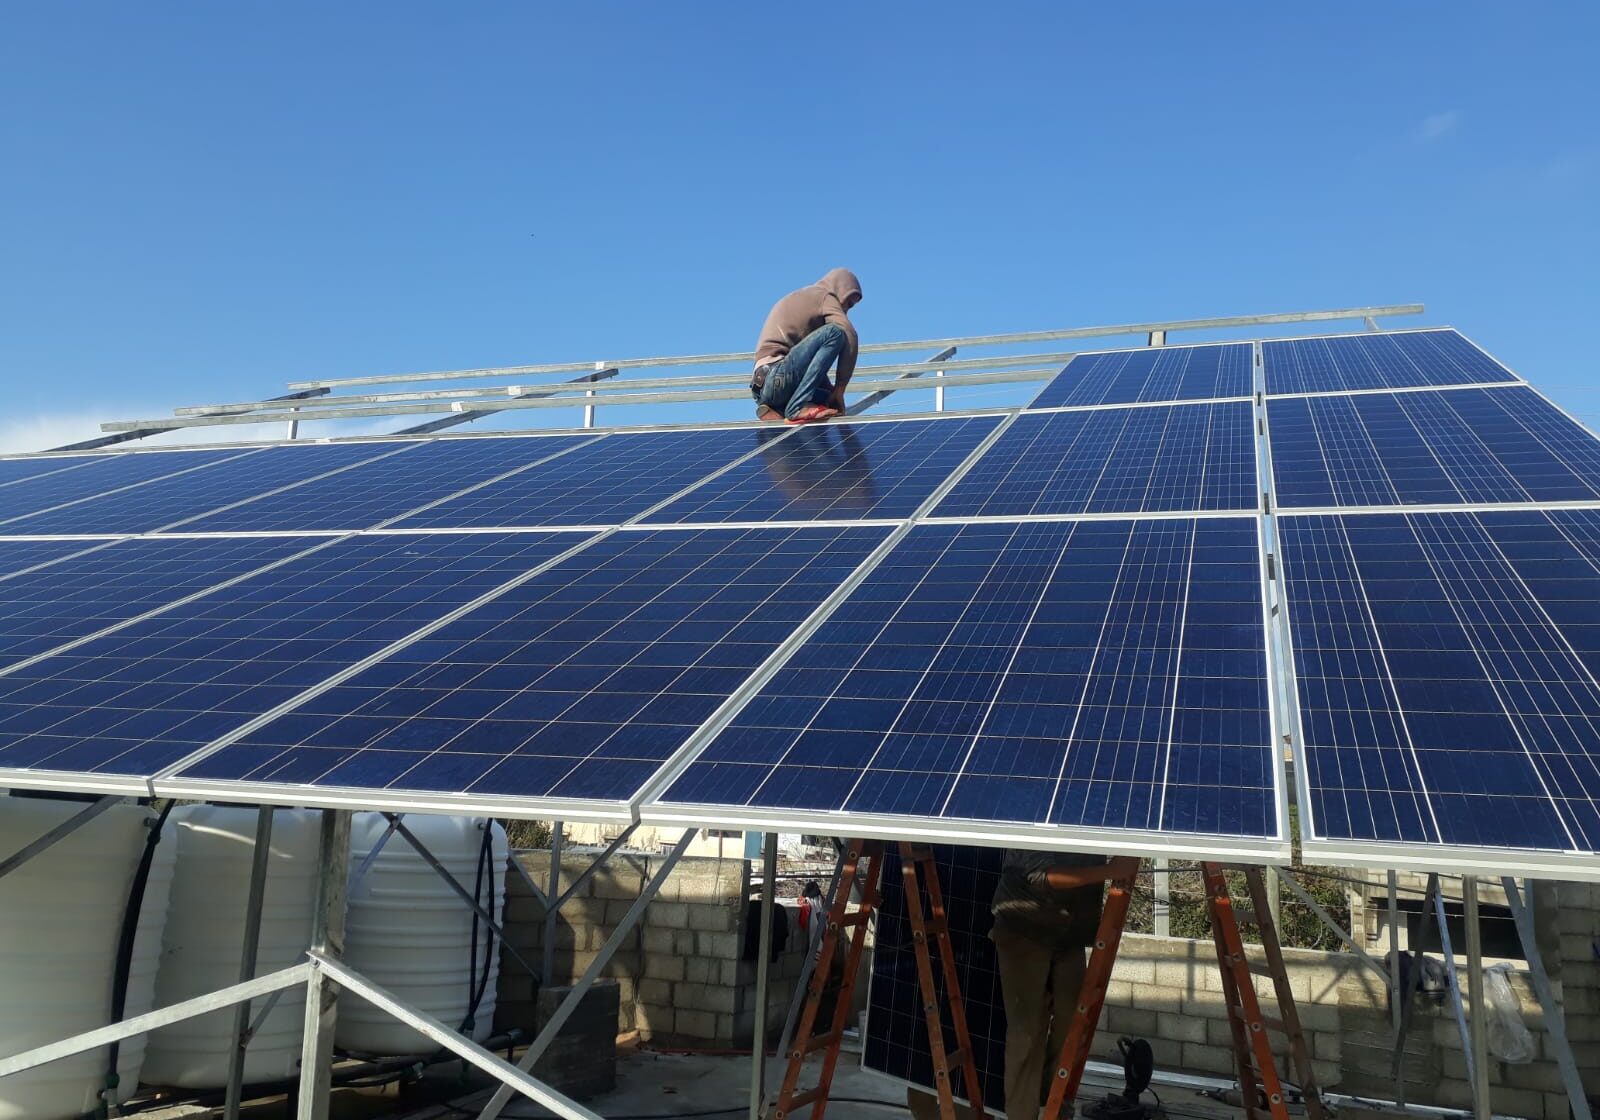 Anera workers installed solar panels on the roof of the Wounded Child Clinic, which serves 6,000 Gaza residents.